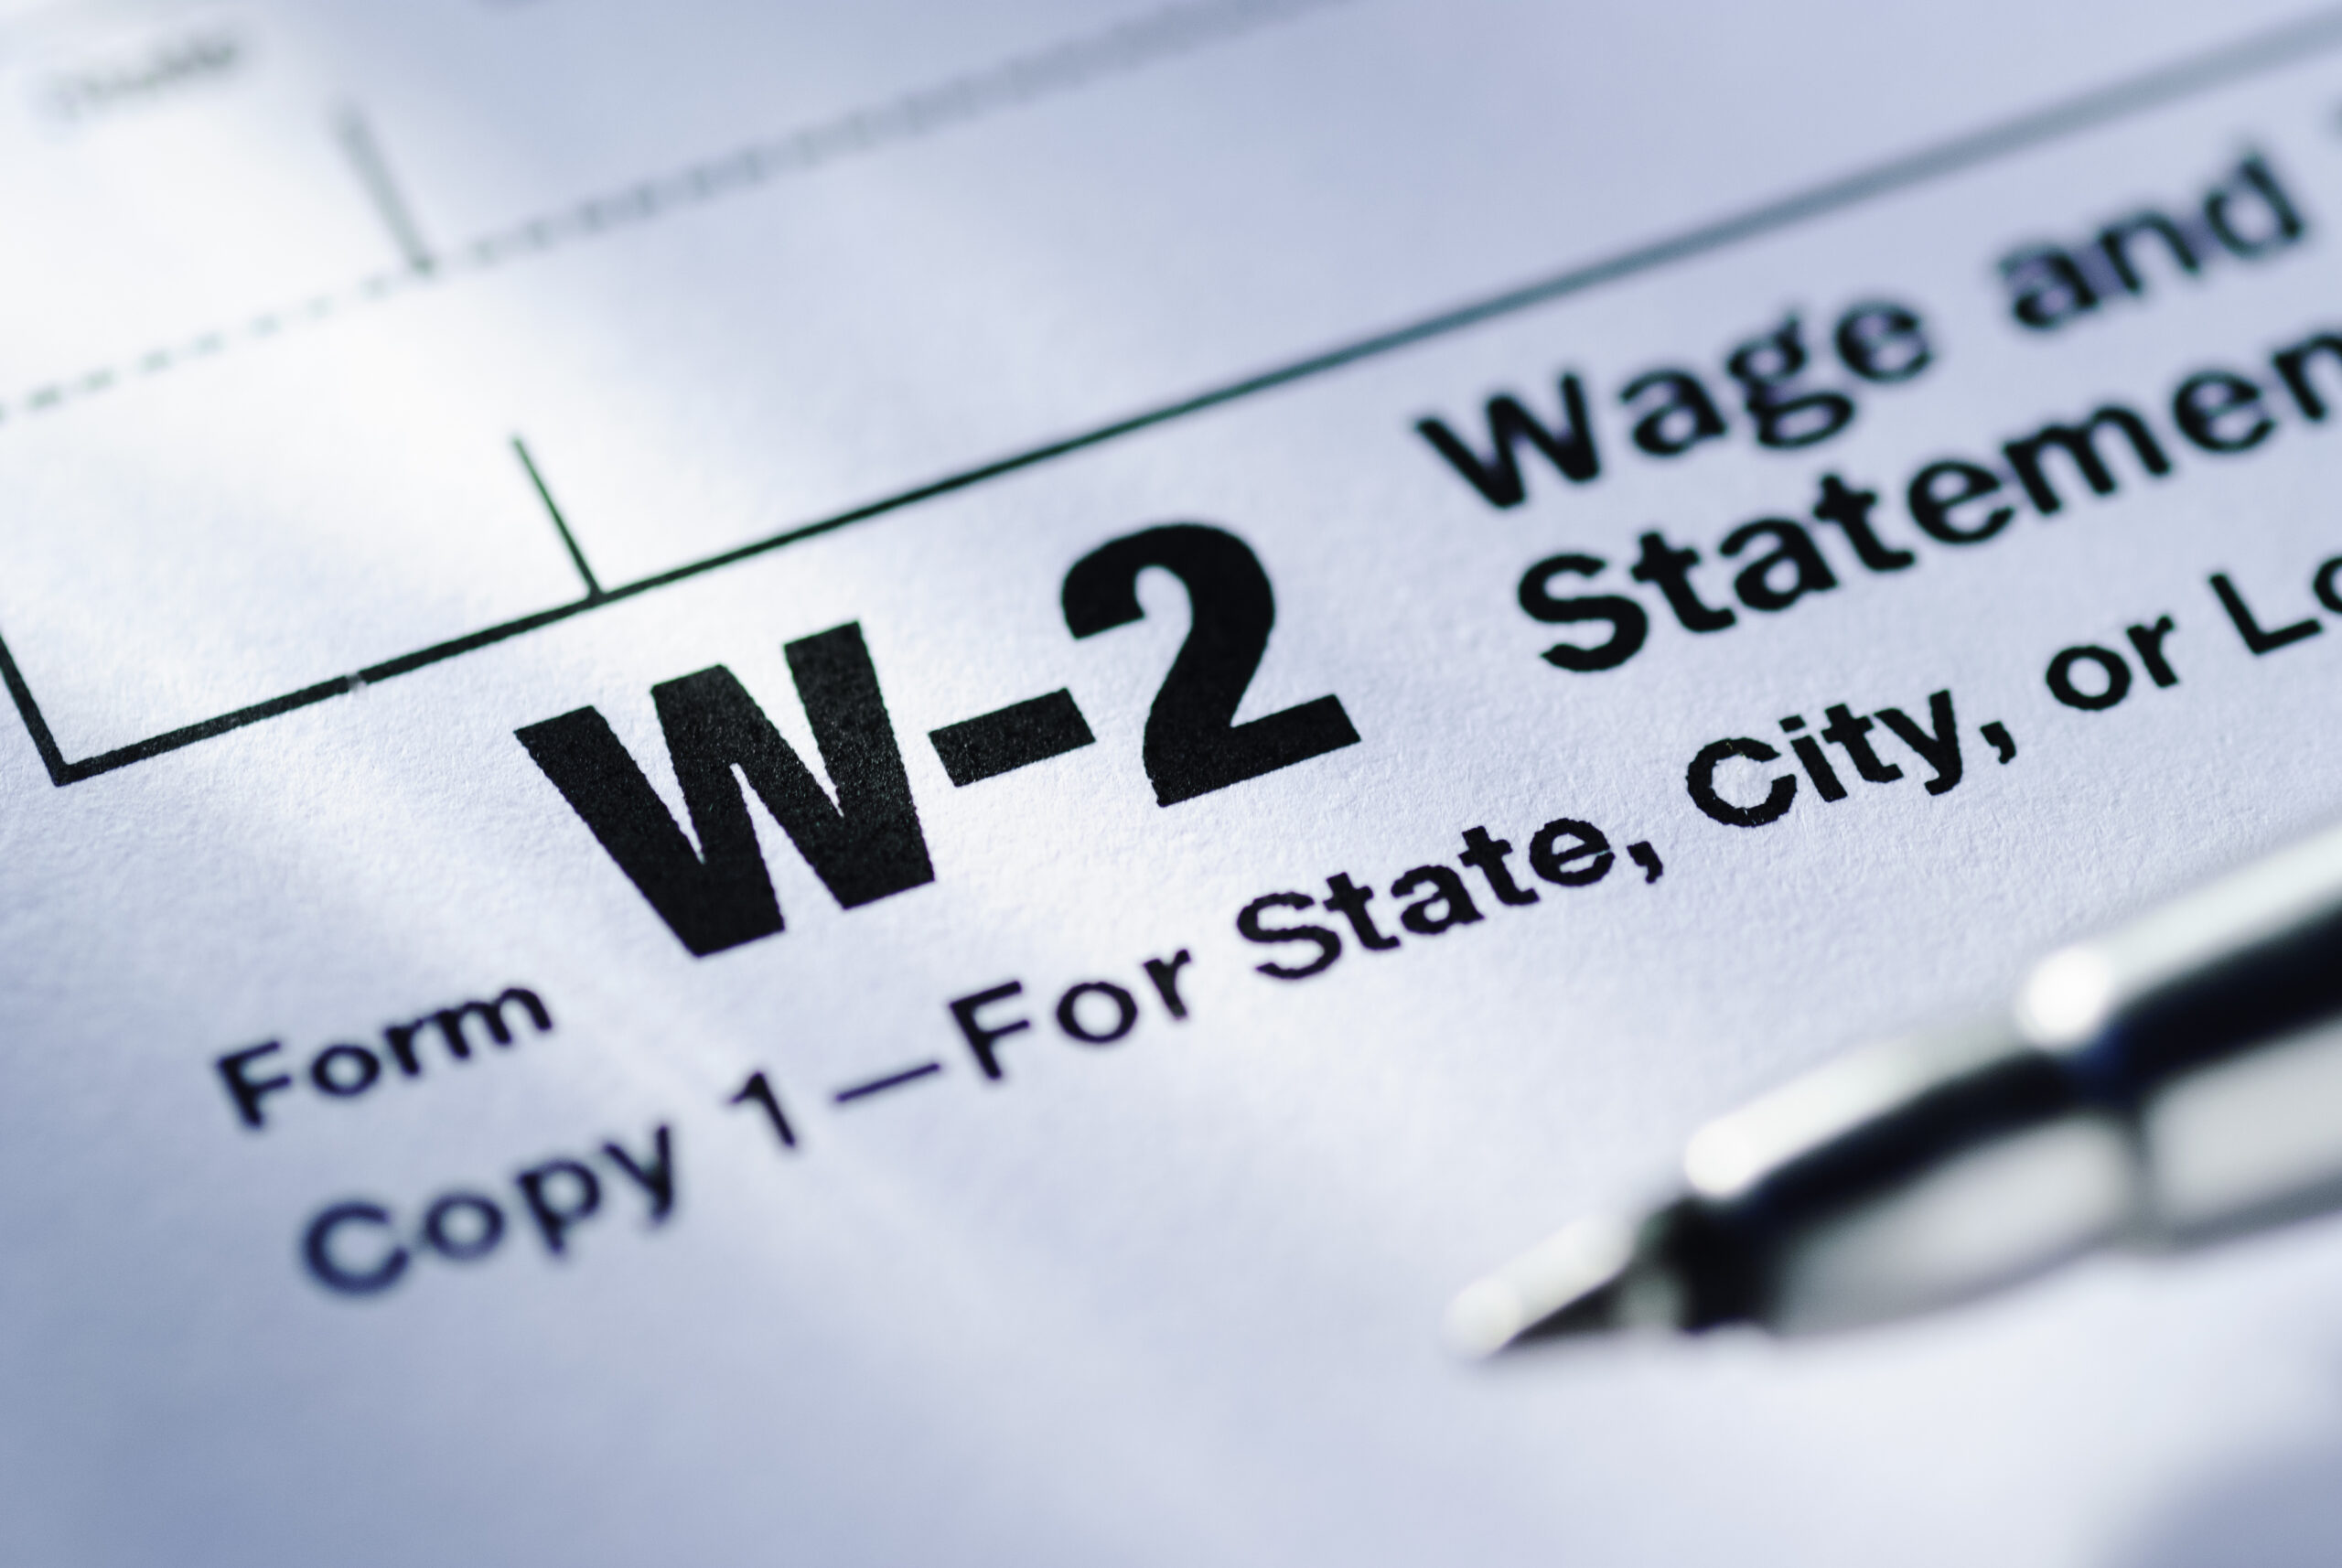 How To Get Your W-2 Form Fast | Sapling inside W2 Form Kroger